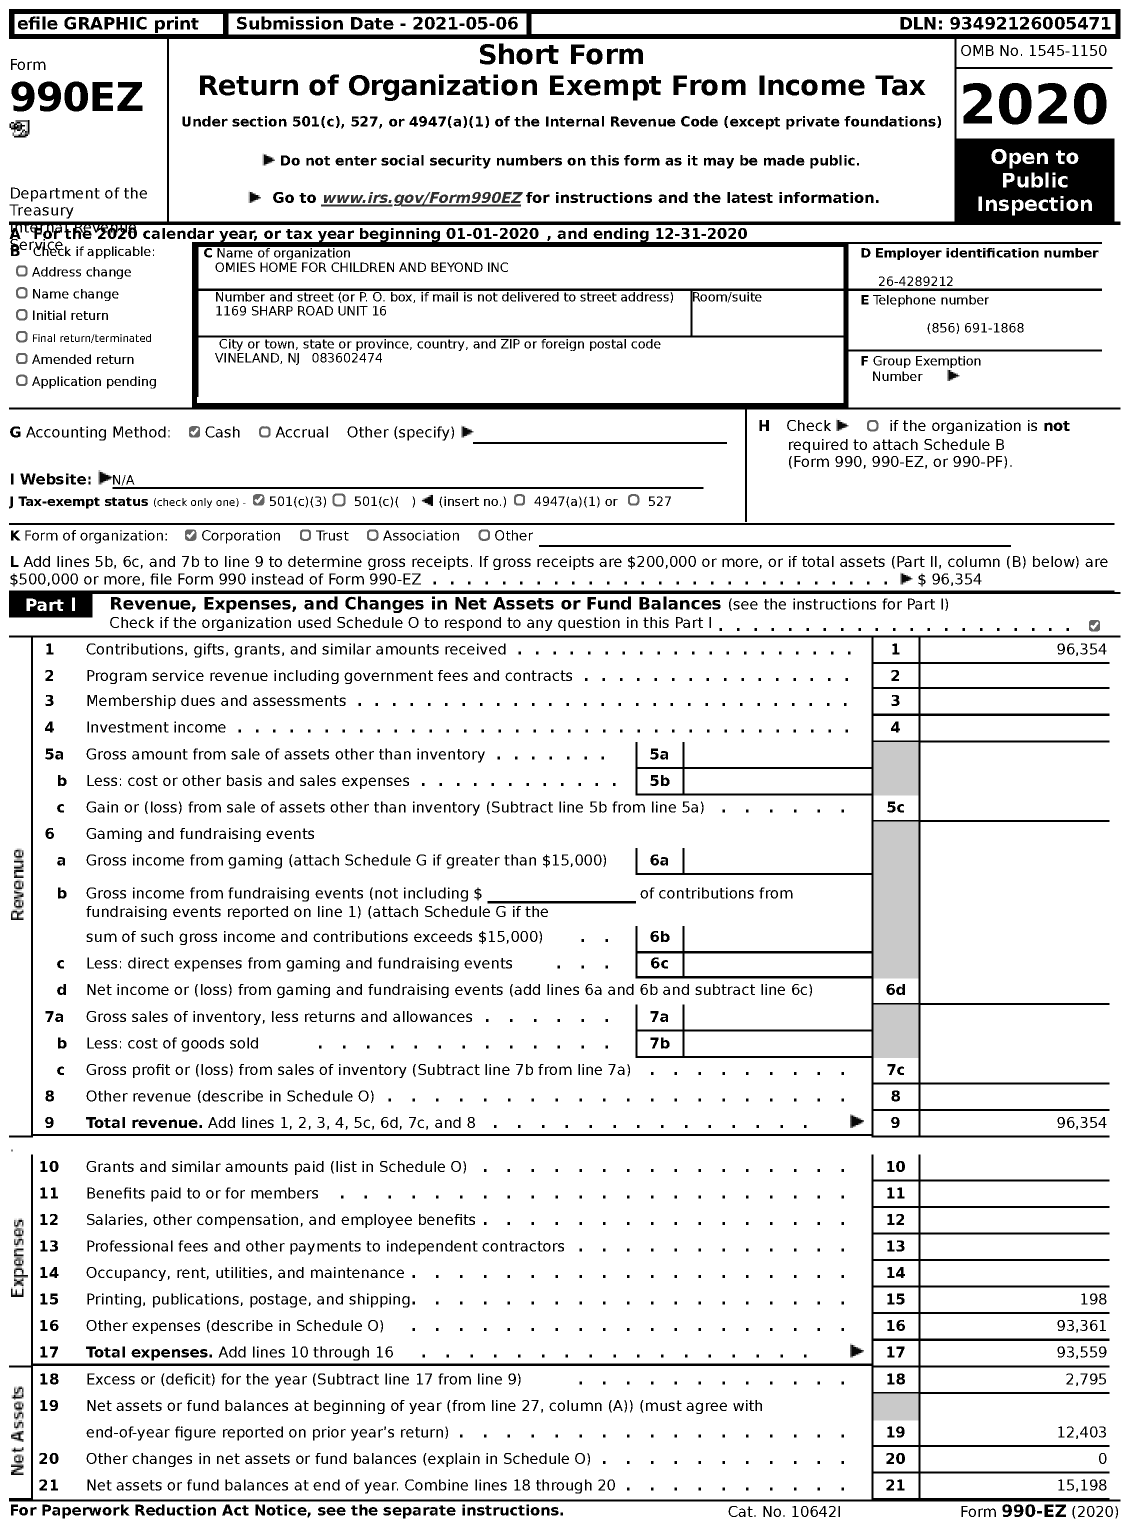 Image of first page of 2020 Form 990EZ for Omies Home for Children and Beyond